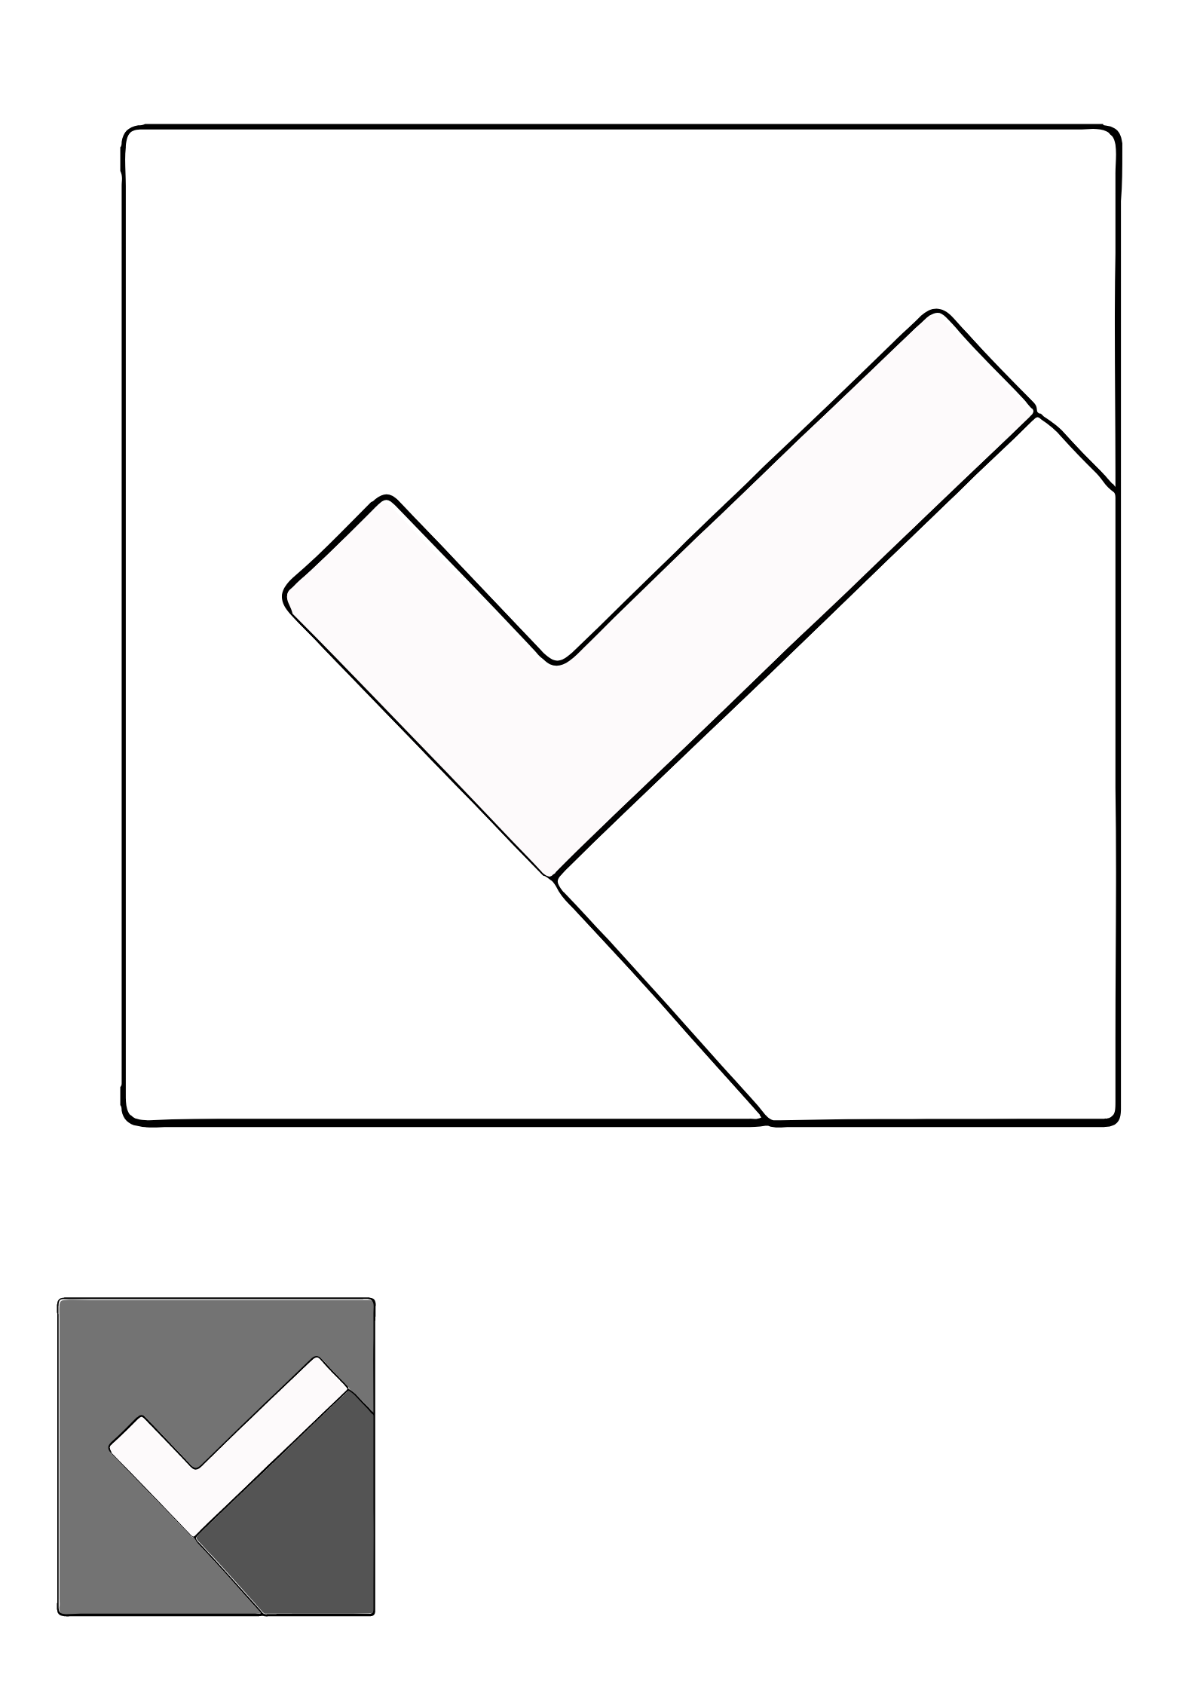 White Check/Tick Mark Coloring Page Template